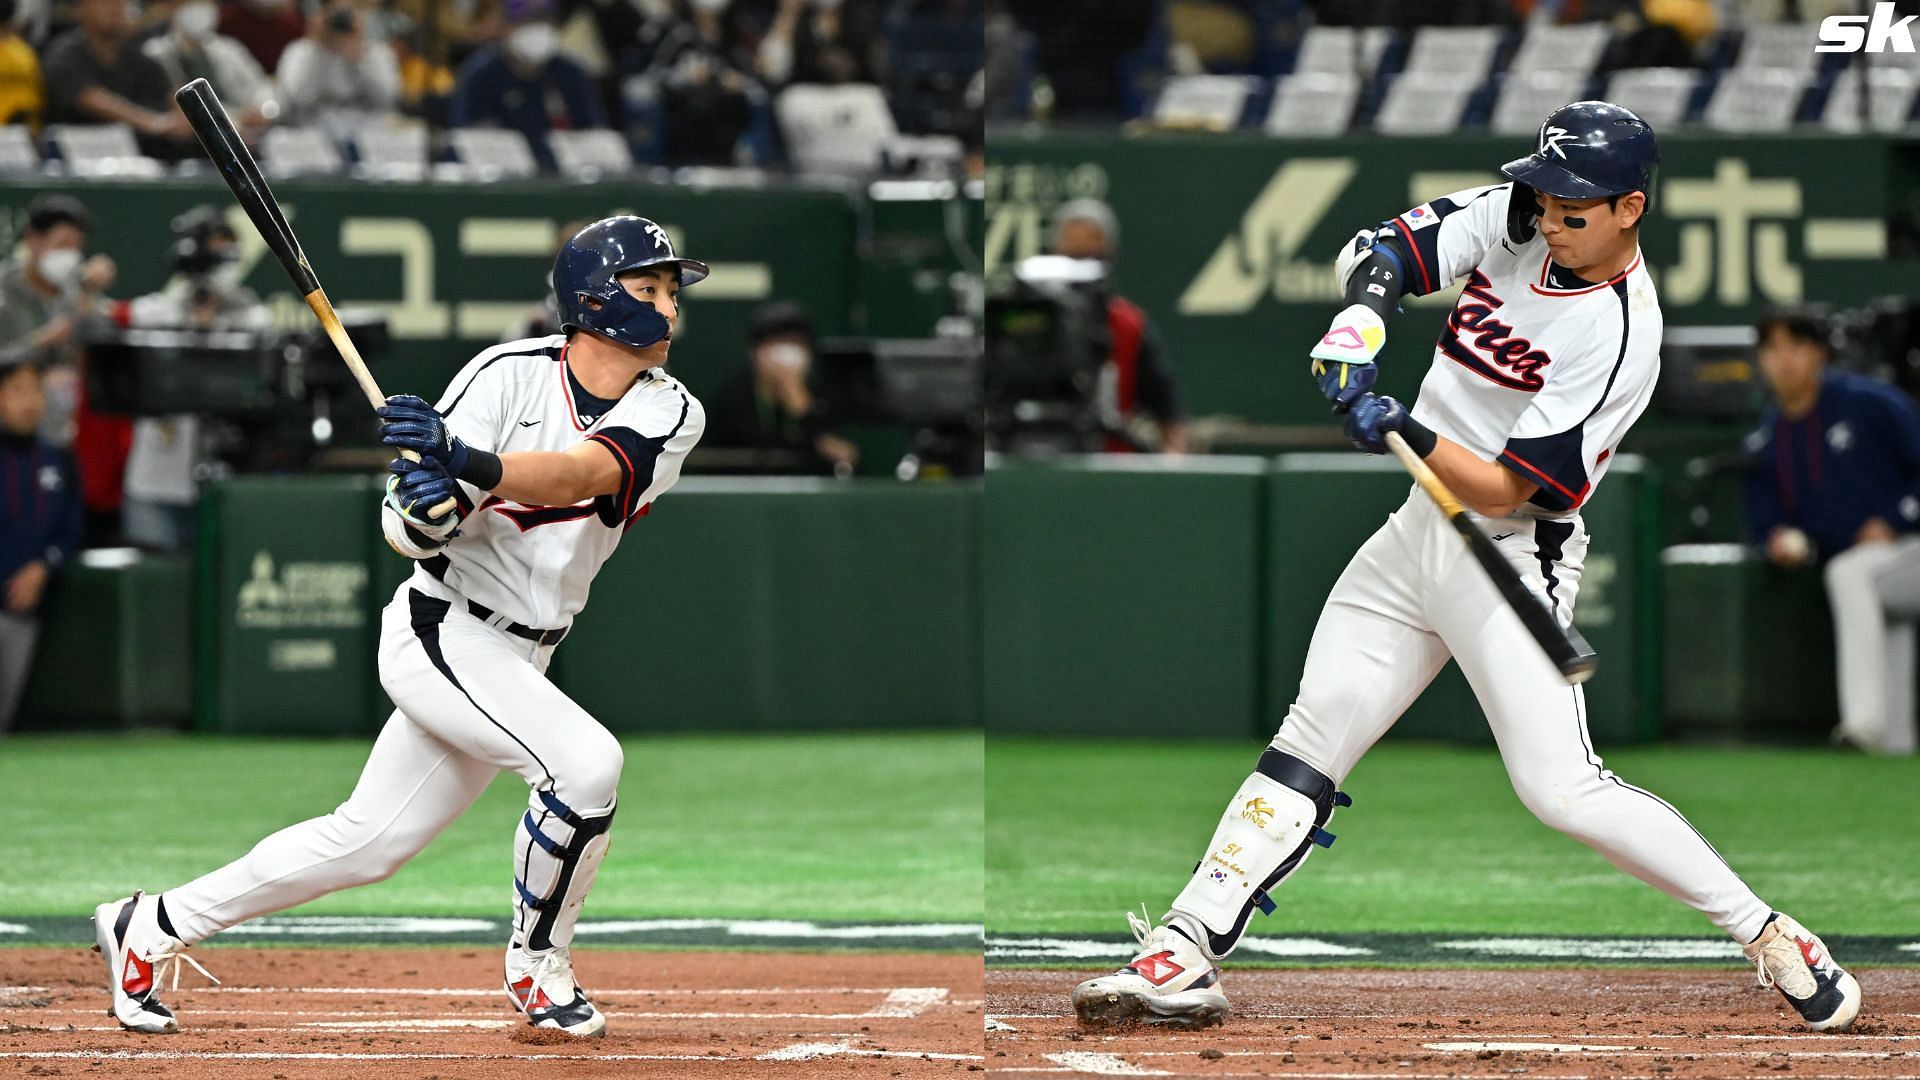 Jung Hoo Lee of Korea hits a RBI single in the first inning during the World Baseball Classic Pool B game between Czech Republic and Korea at Tokyo Dome